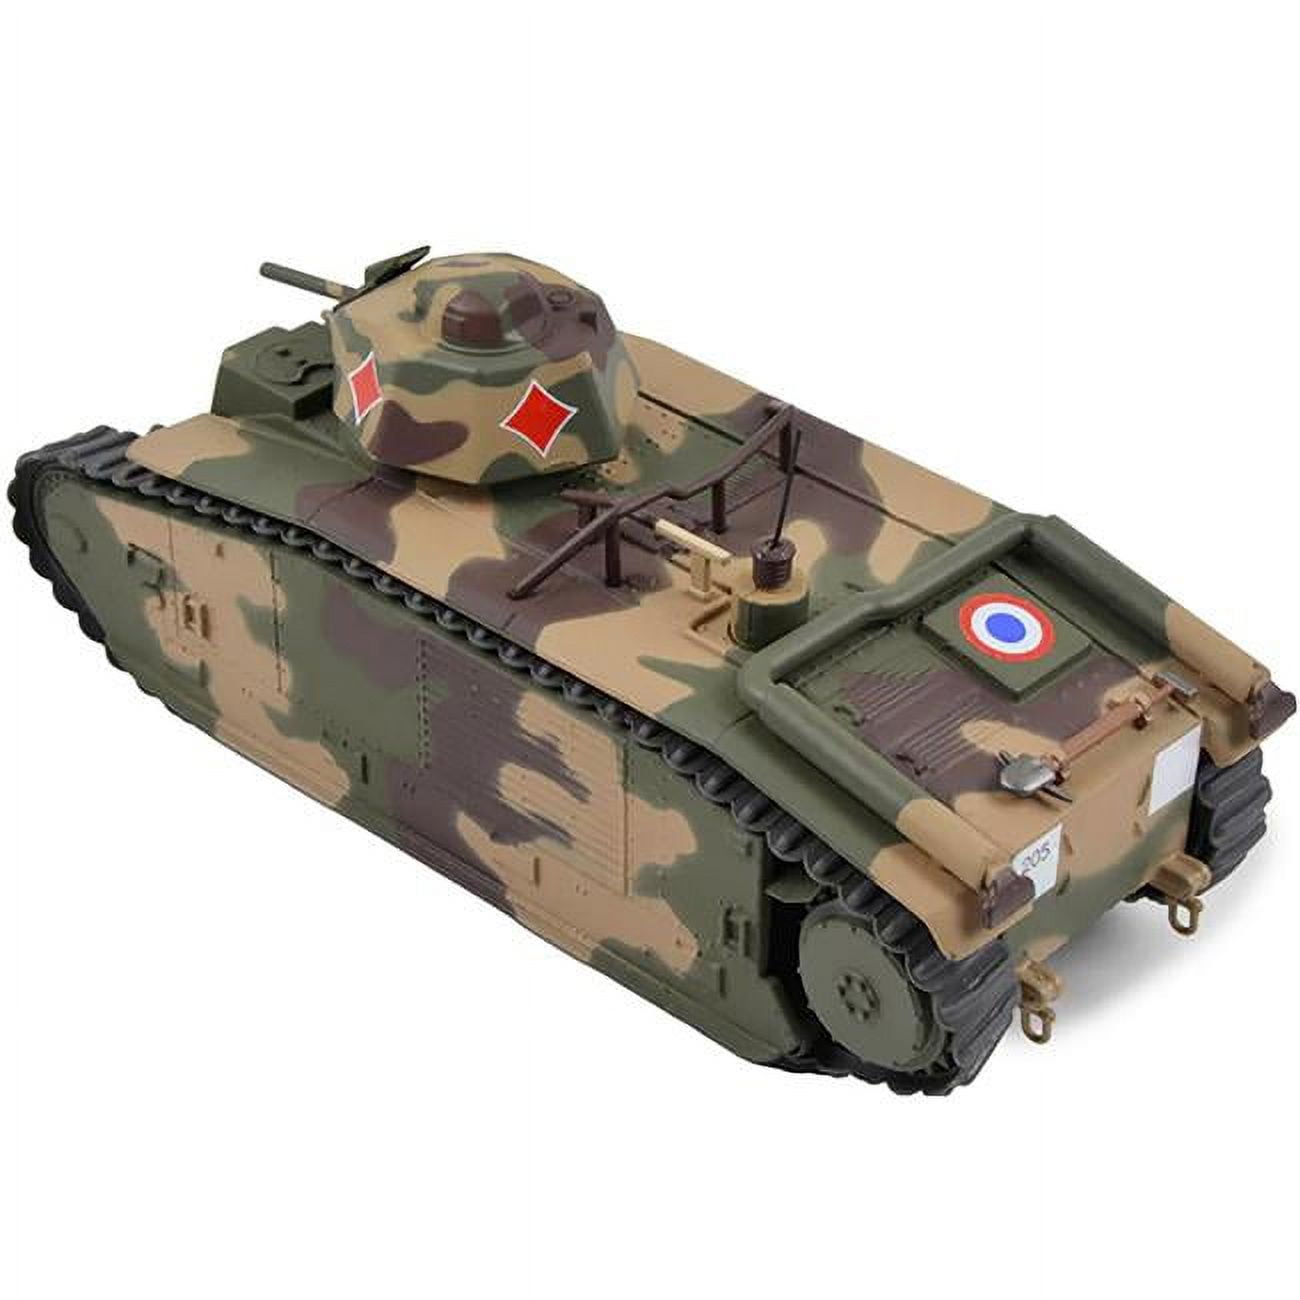 Picture of AFVs of WWII 23183-44 French Char B-1 Heavy Tank Indochine France 3E Compagnie 15E Batallion France 1940 1 by 43 Scale Diecast Model Car